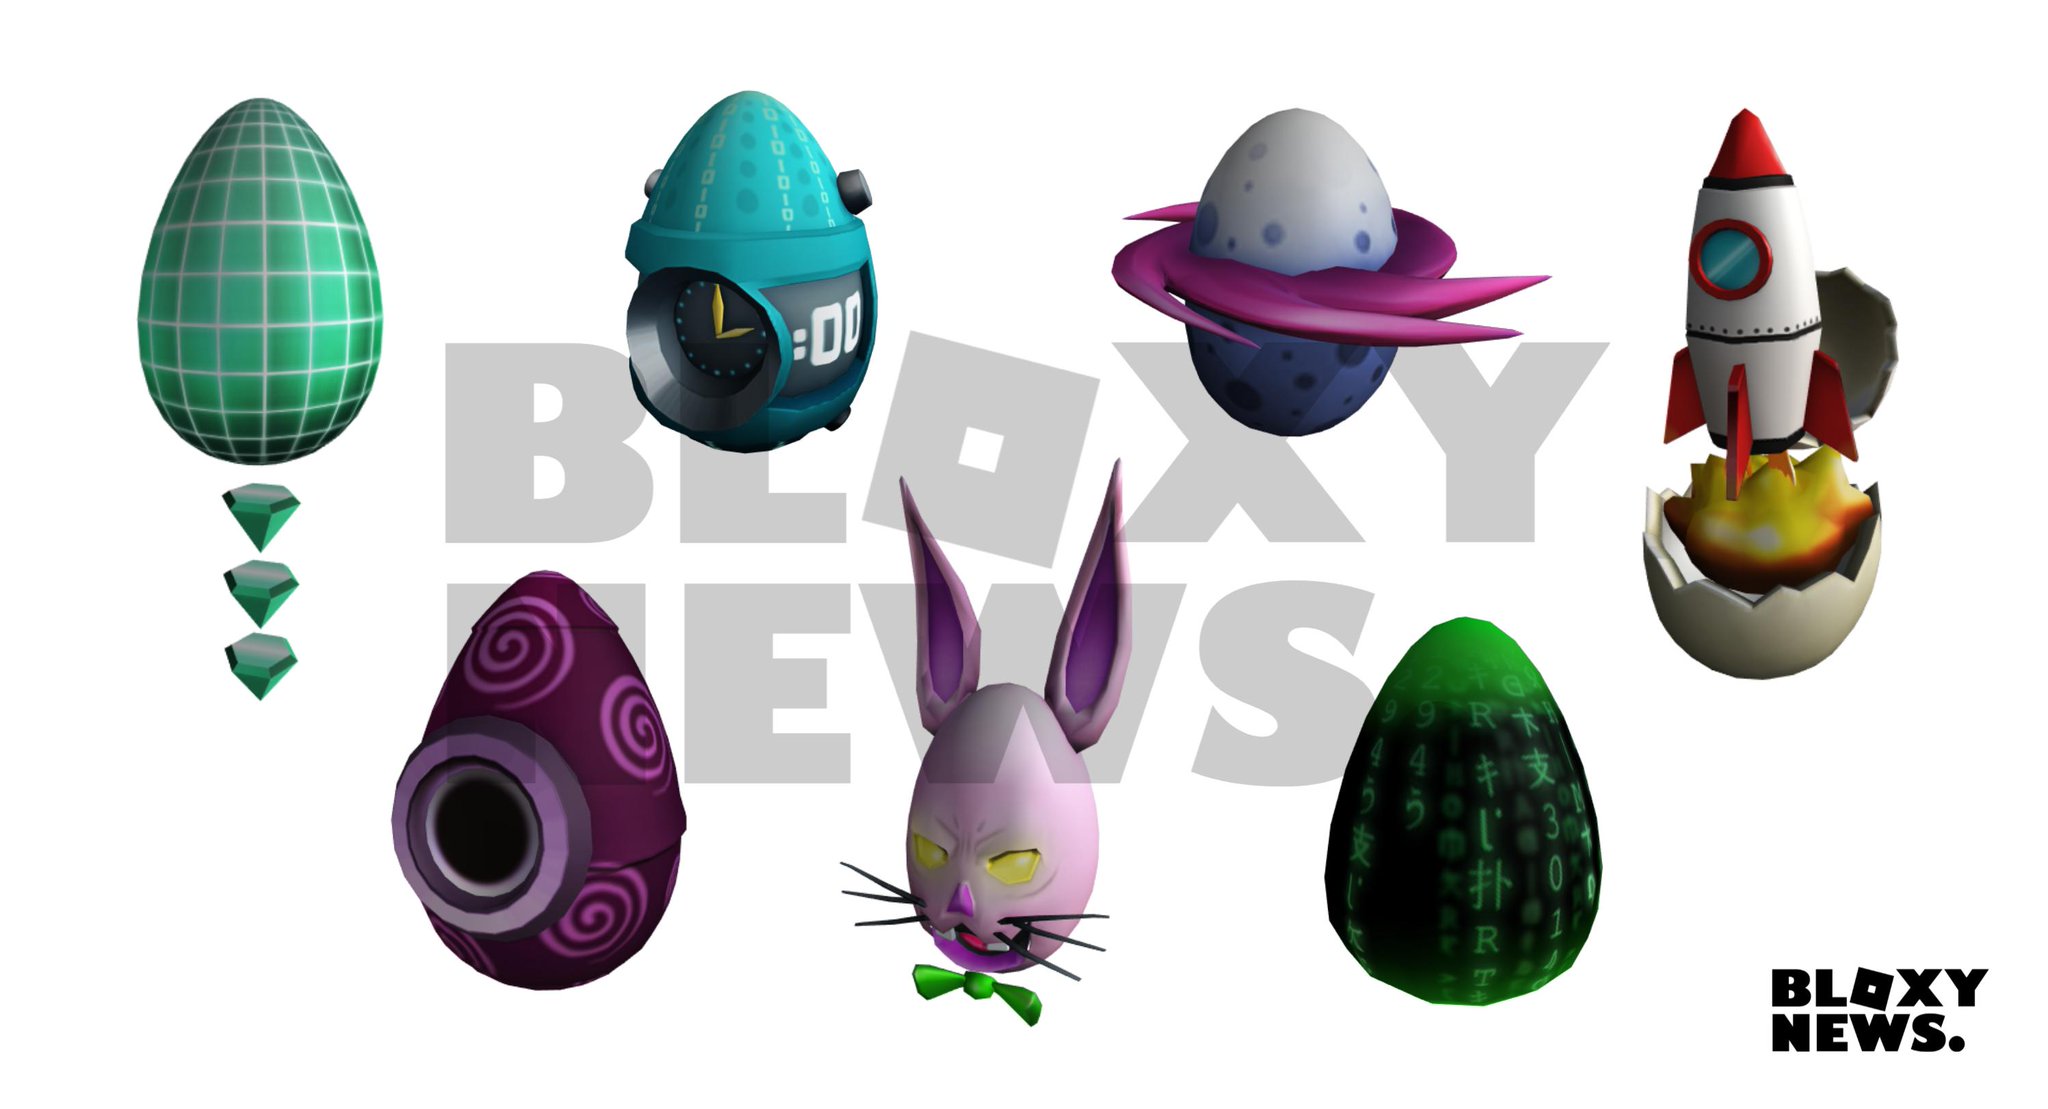 Bloxy News On Twitter Bloxynews The First 7 Eggs Of The Roblox Egghunt2019 Fractured In Time Have Been Leaked Head To The Rbxleaks Twitter For The Full 3d View Https T Co Vdkdta2lex - bloxy news on twitter bloxynews the next batch of eggs for the roblox 2019 egg hunt scrambled in time have been leaked https t co tvyakc3dim https t co cejezuondl